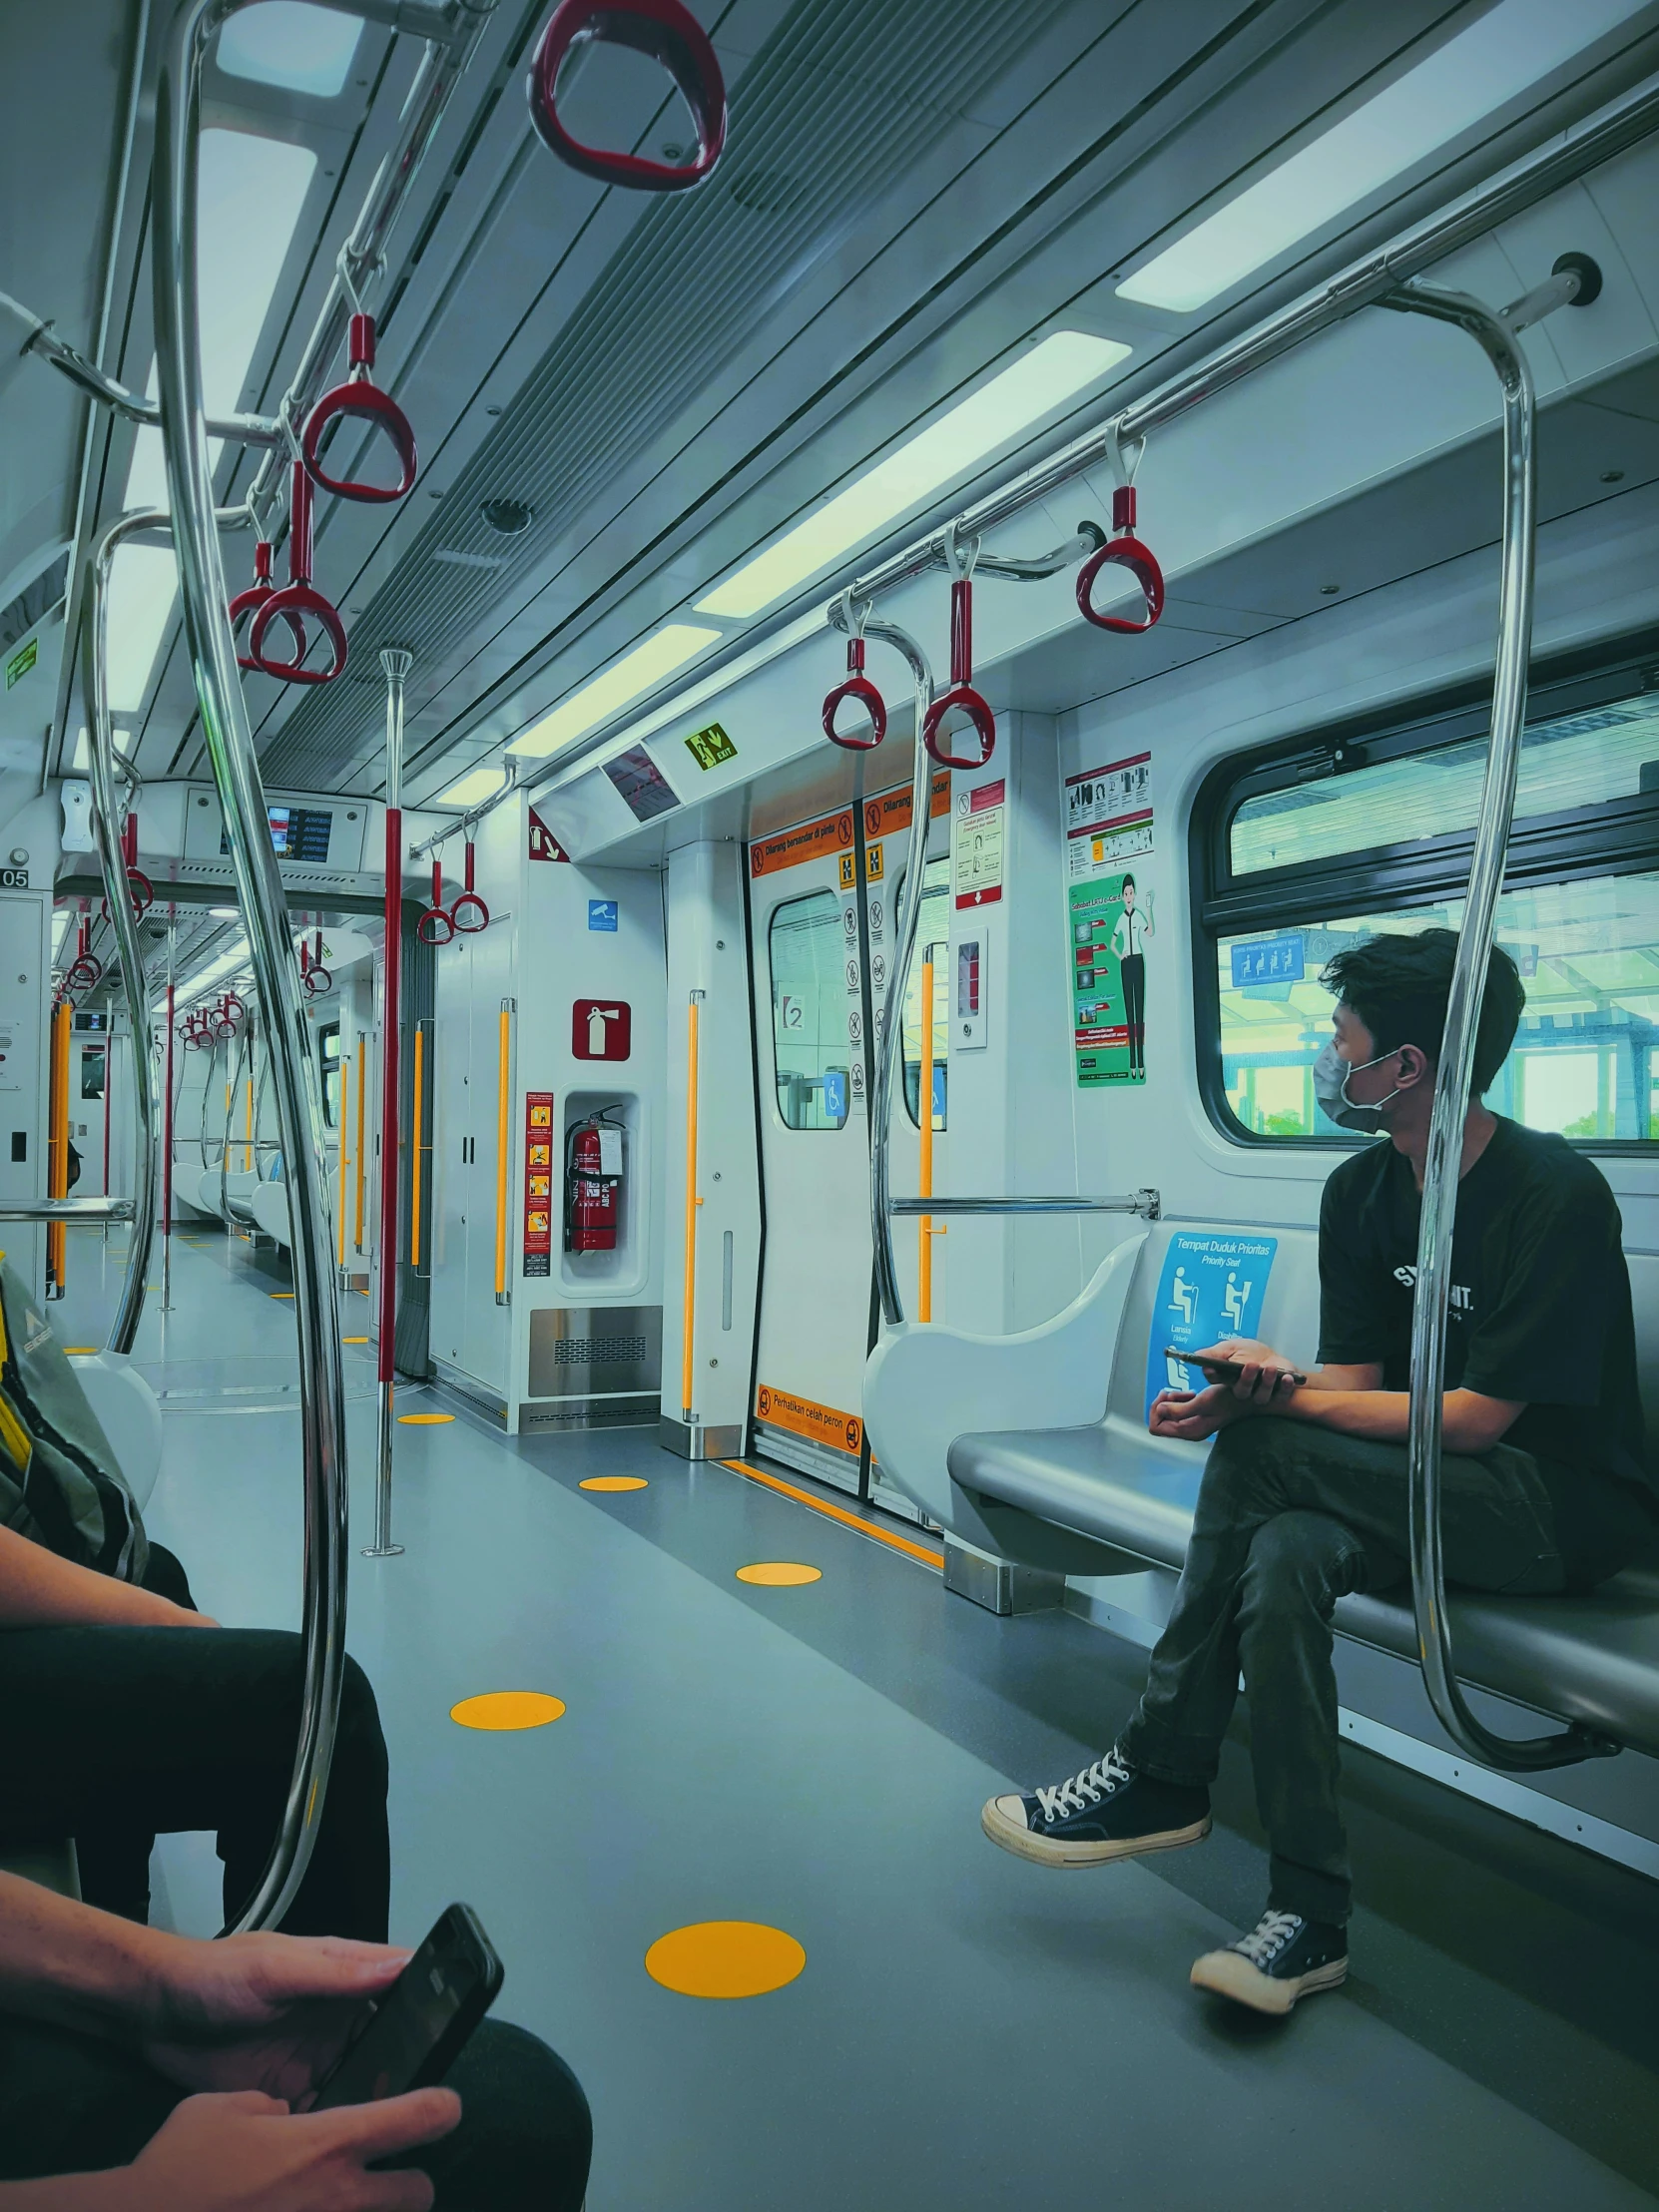 two people are sitting on a train inside the car